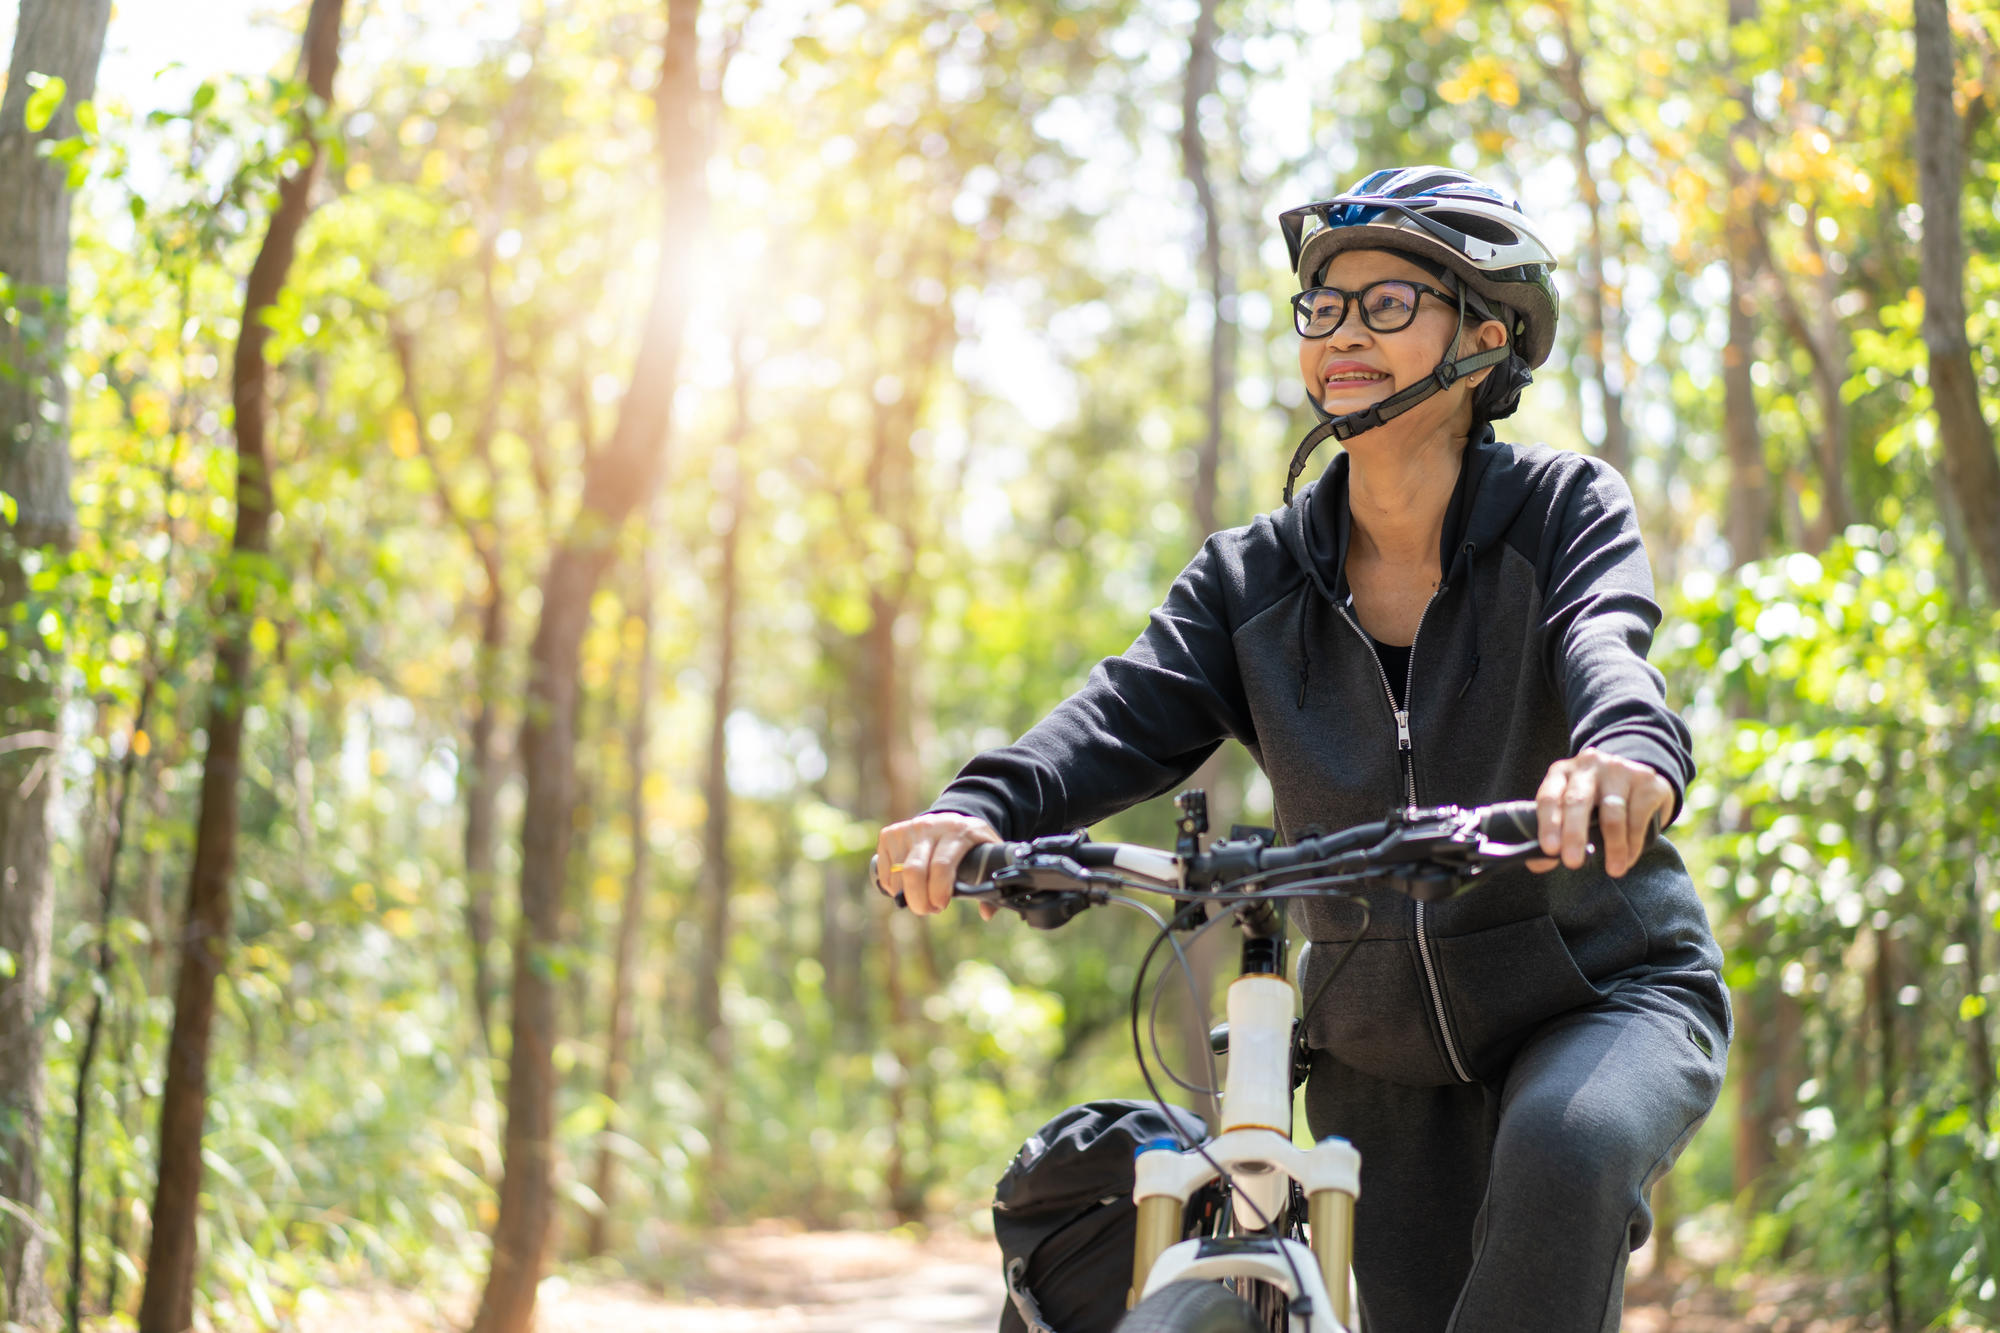 A middle-aged woman biking in a forest.